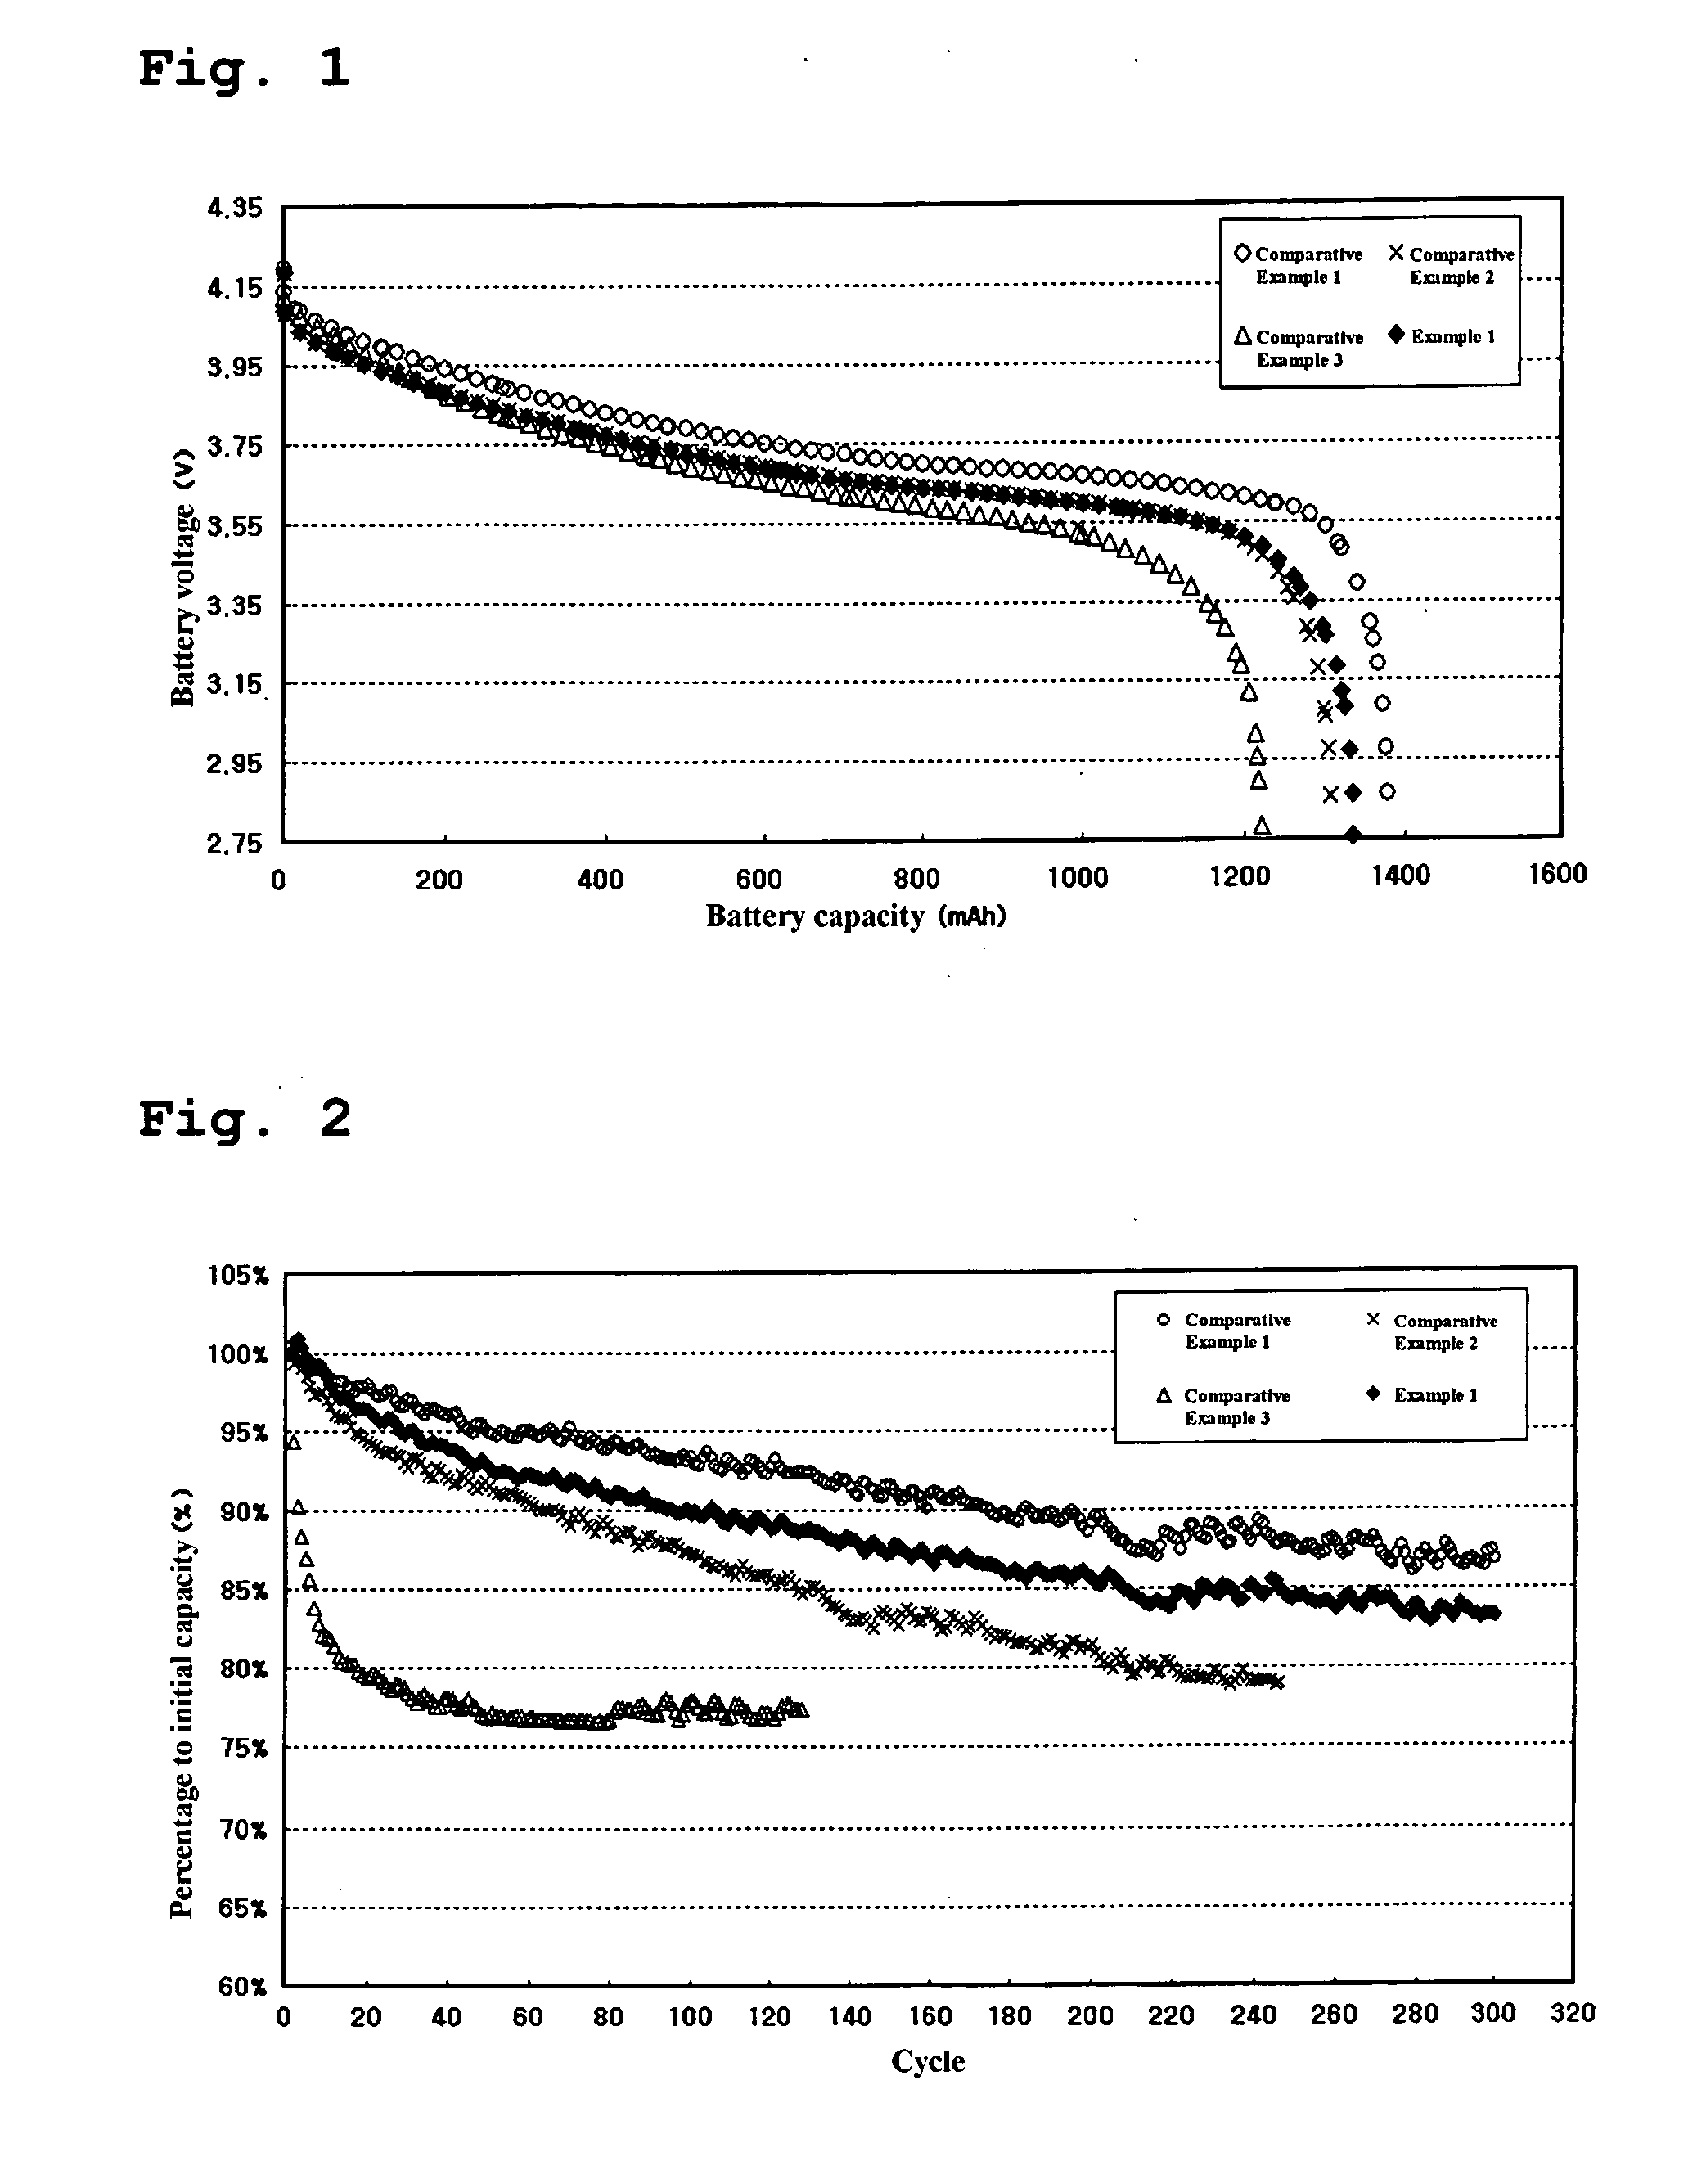 Electrolyte for lithium ion battery to control swelling